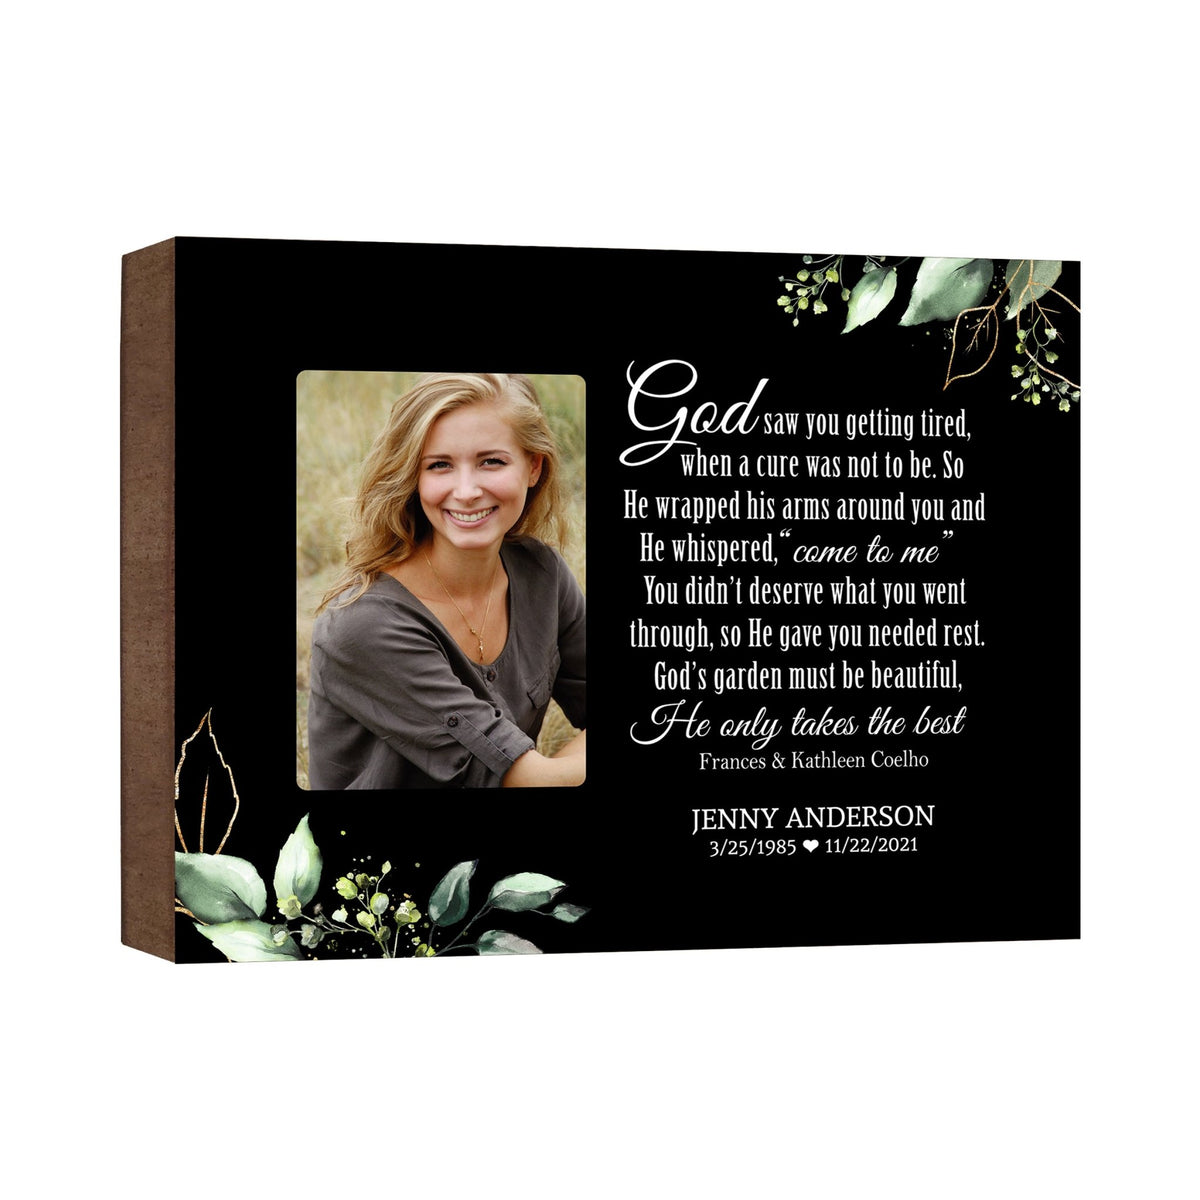 Personalized Human Memorial Black Photo &amp; Inspirational Verse Bereavement Wall Décor &amp; Sympathy Gift Ideas - God Saw You - LifeSong Milestones